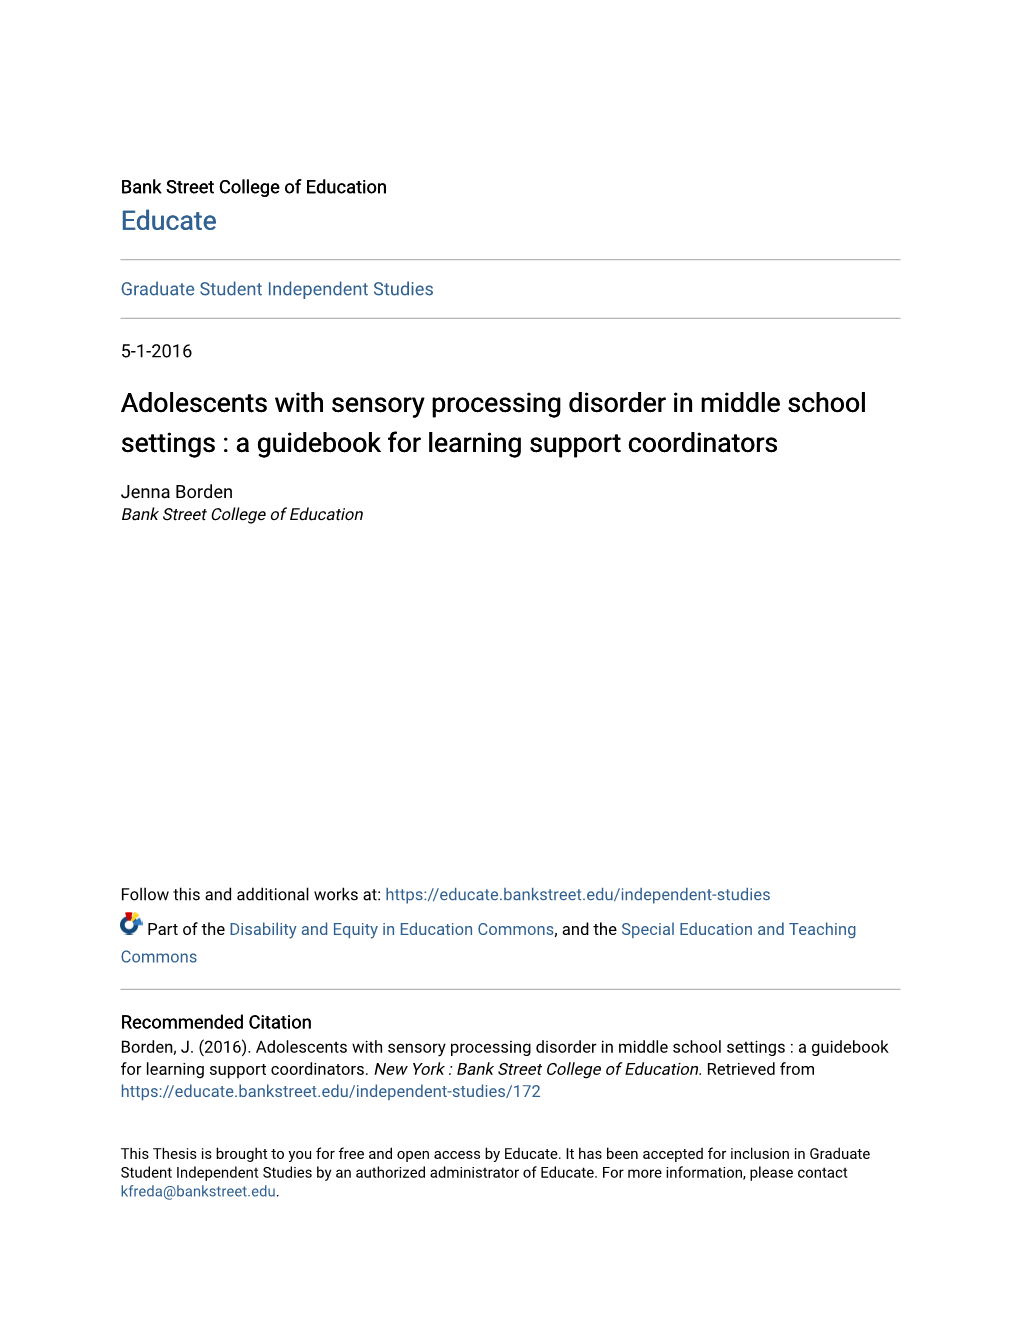 Adolescents with Sensory Processing Disorder in Middle School Settings : a Guidebook for Learning Support Coordinators